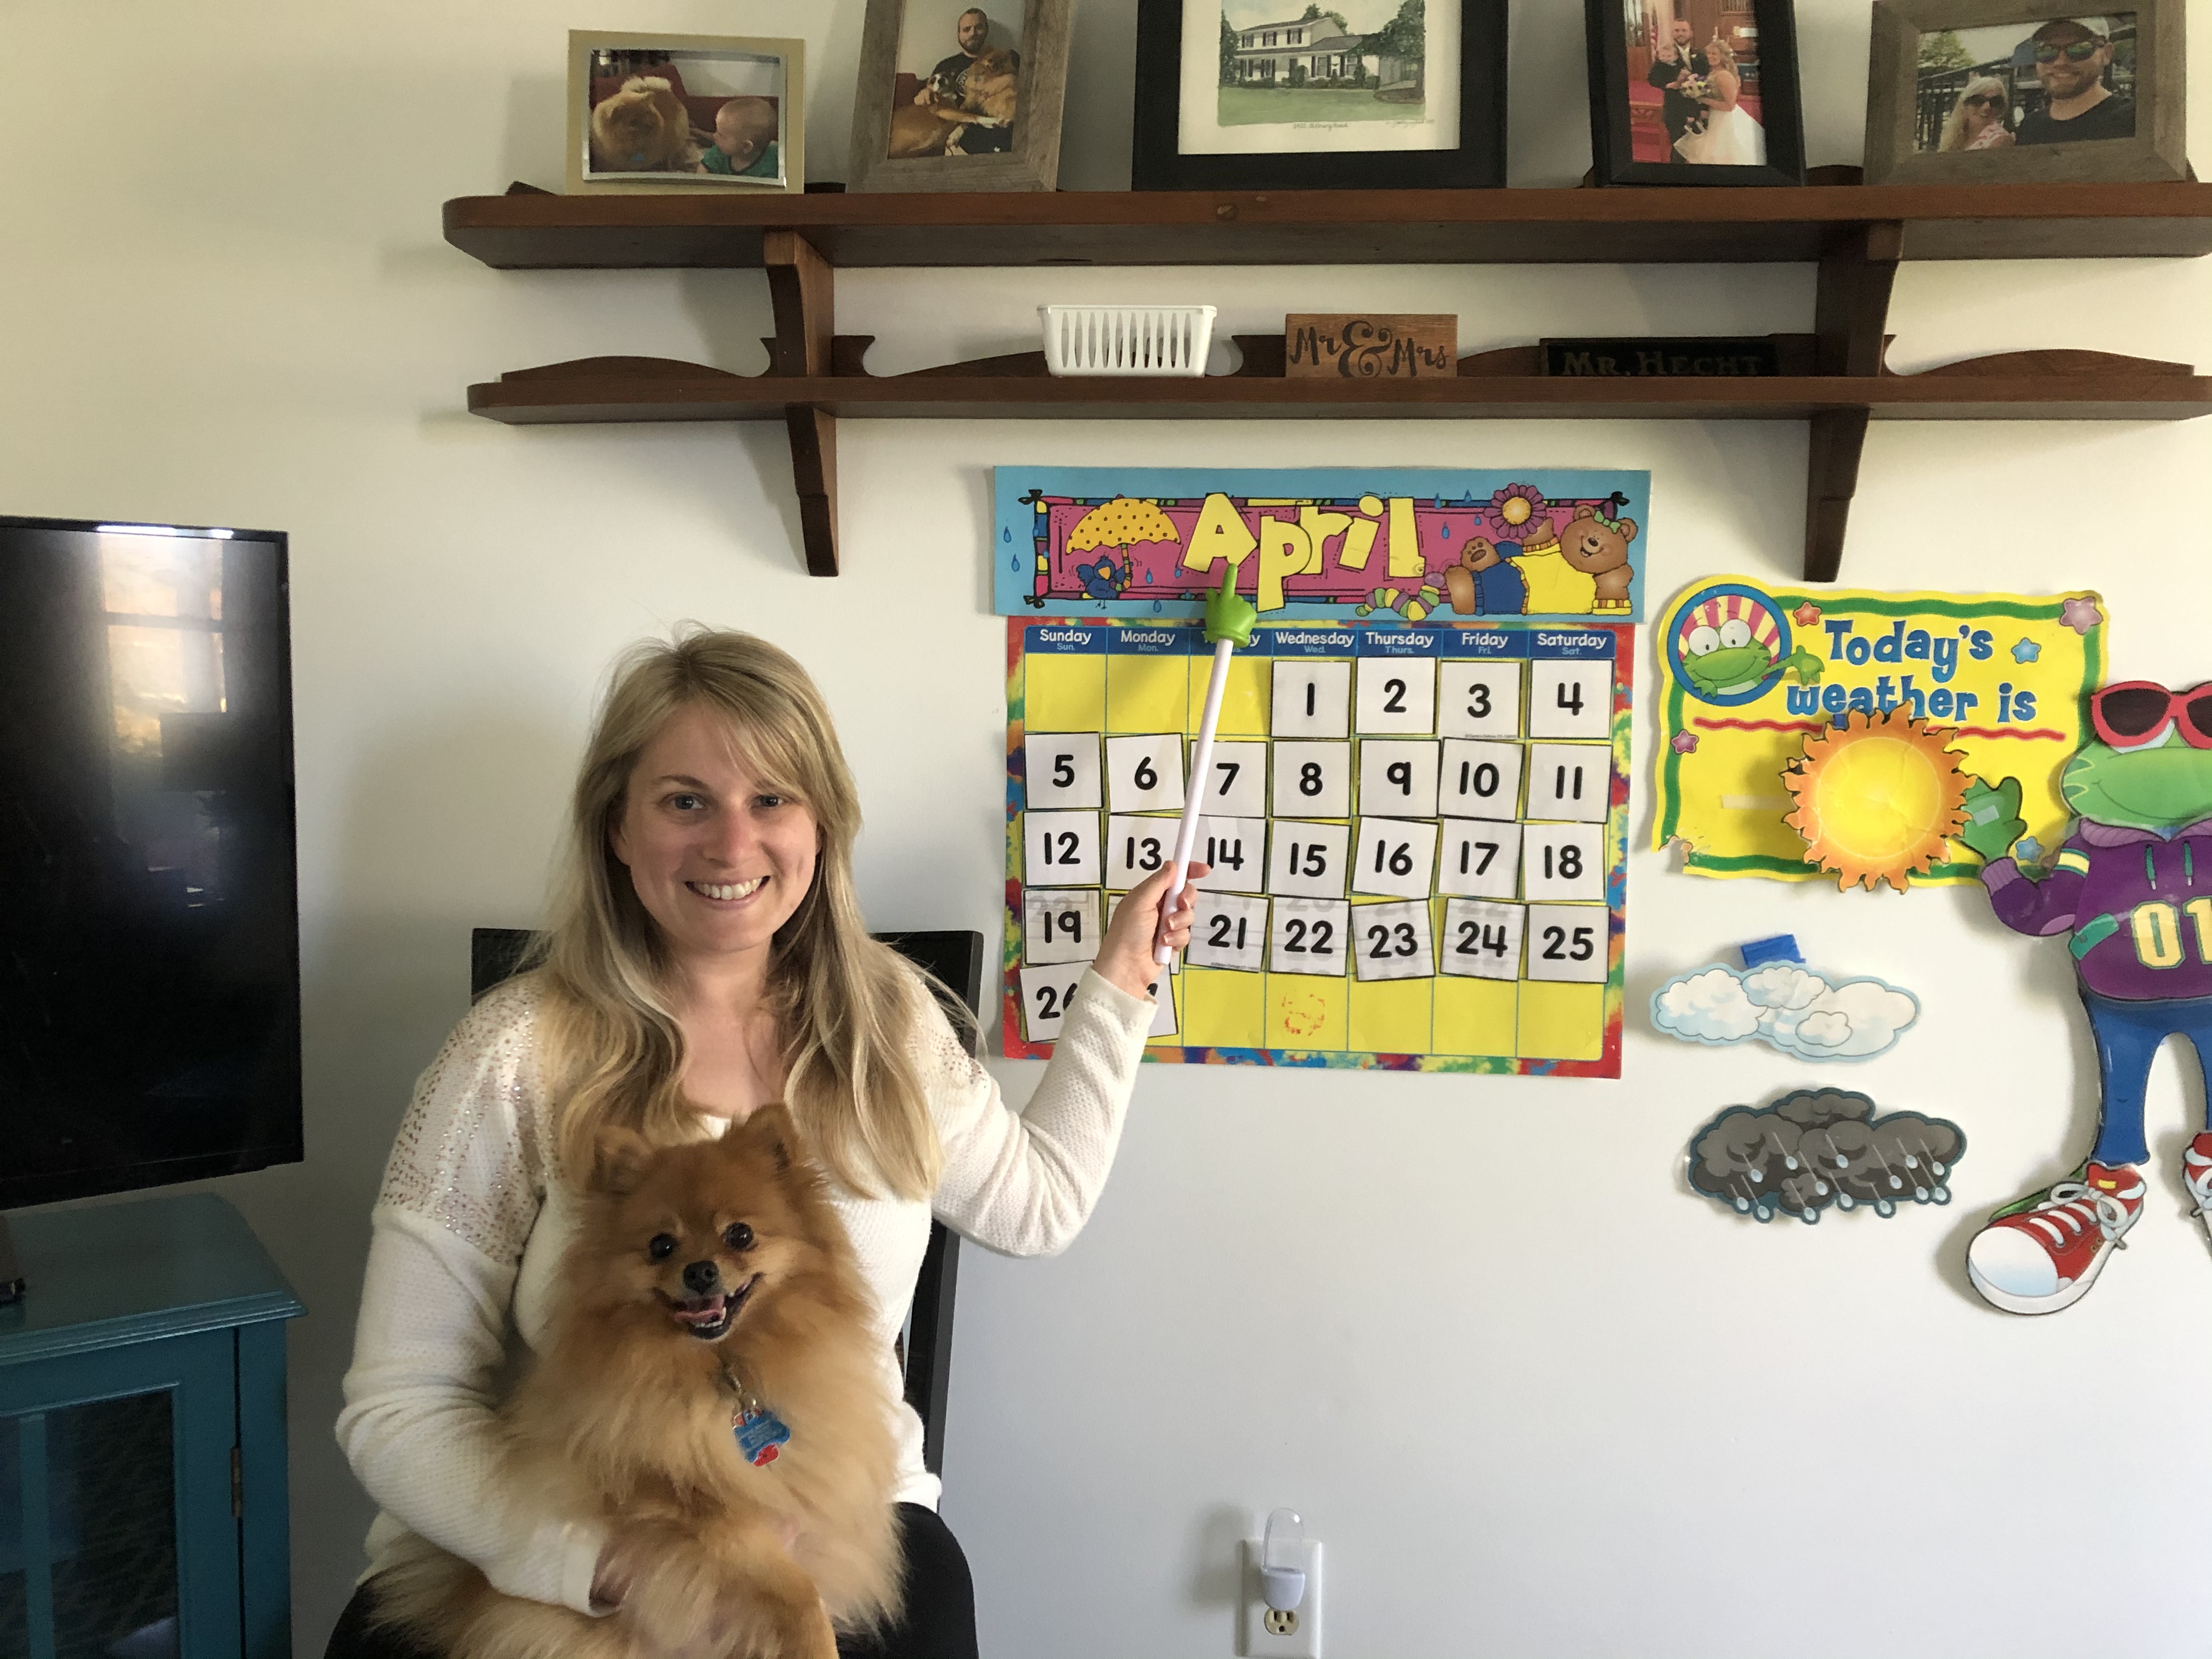 A blonde woman pointing to a child's calendar. She has a gold Pomeranian in her lap.